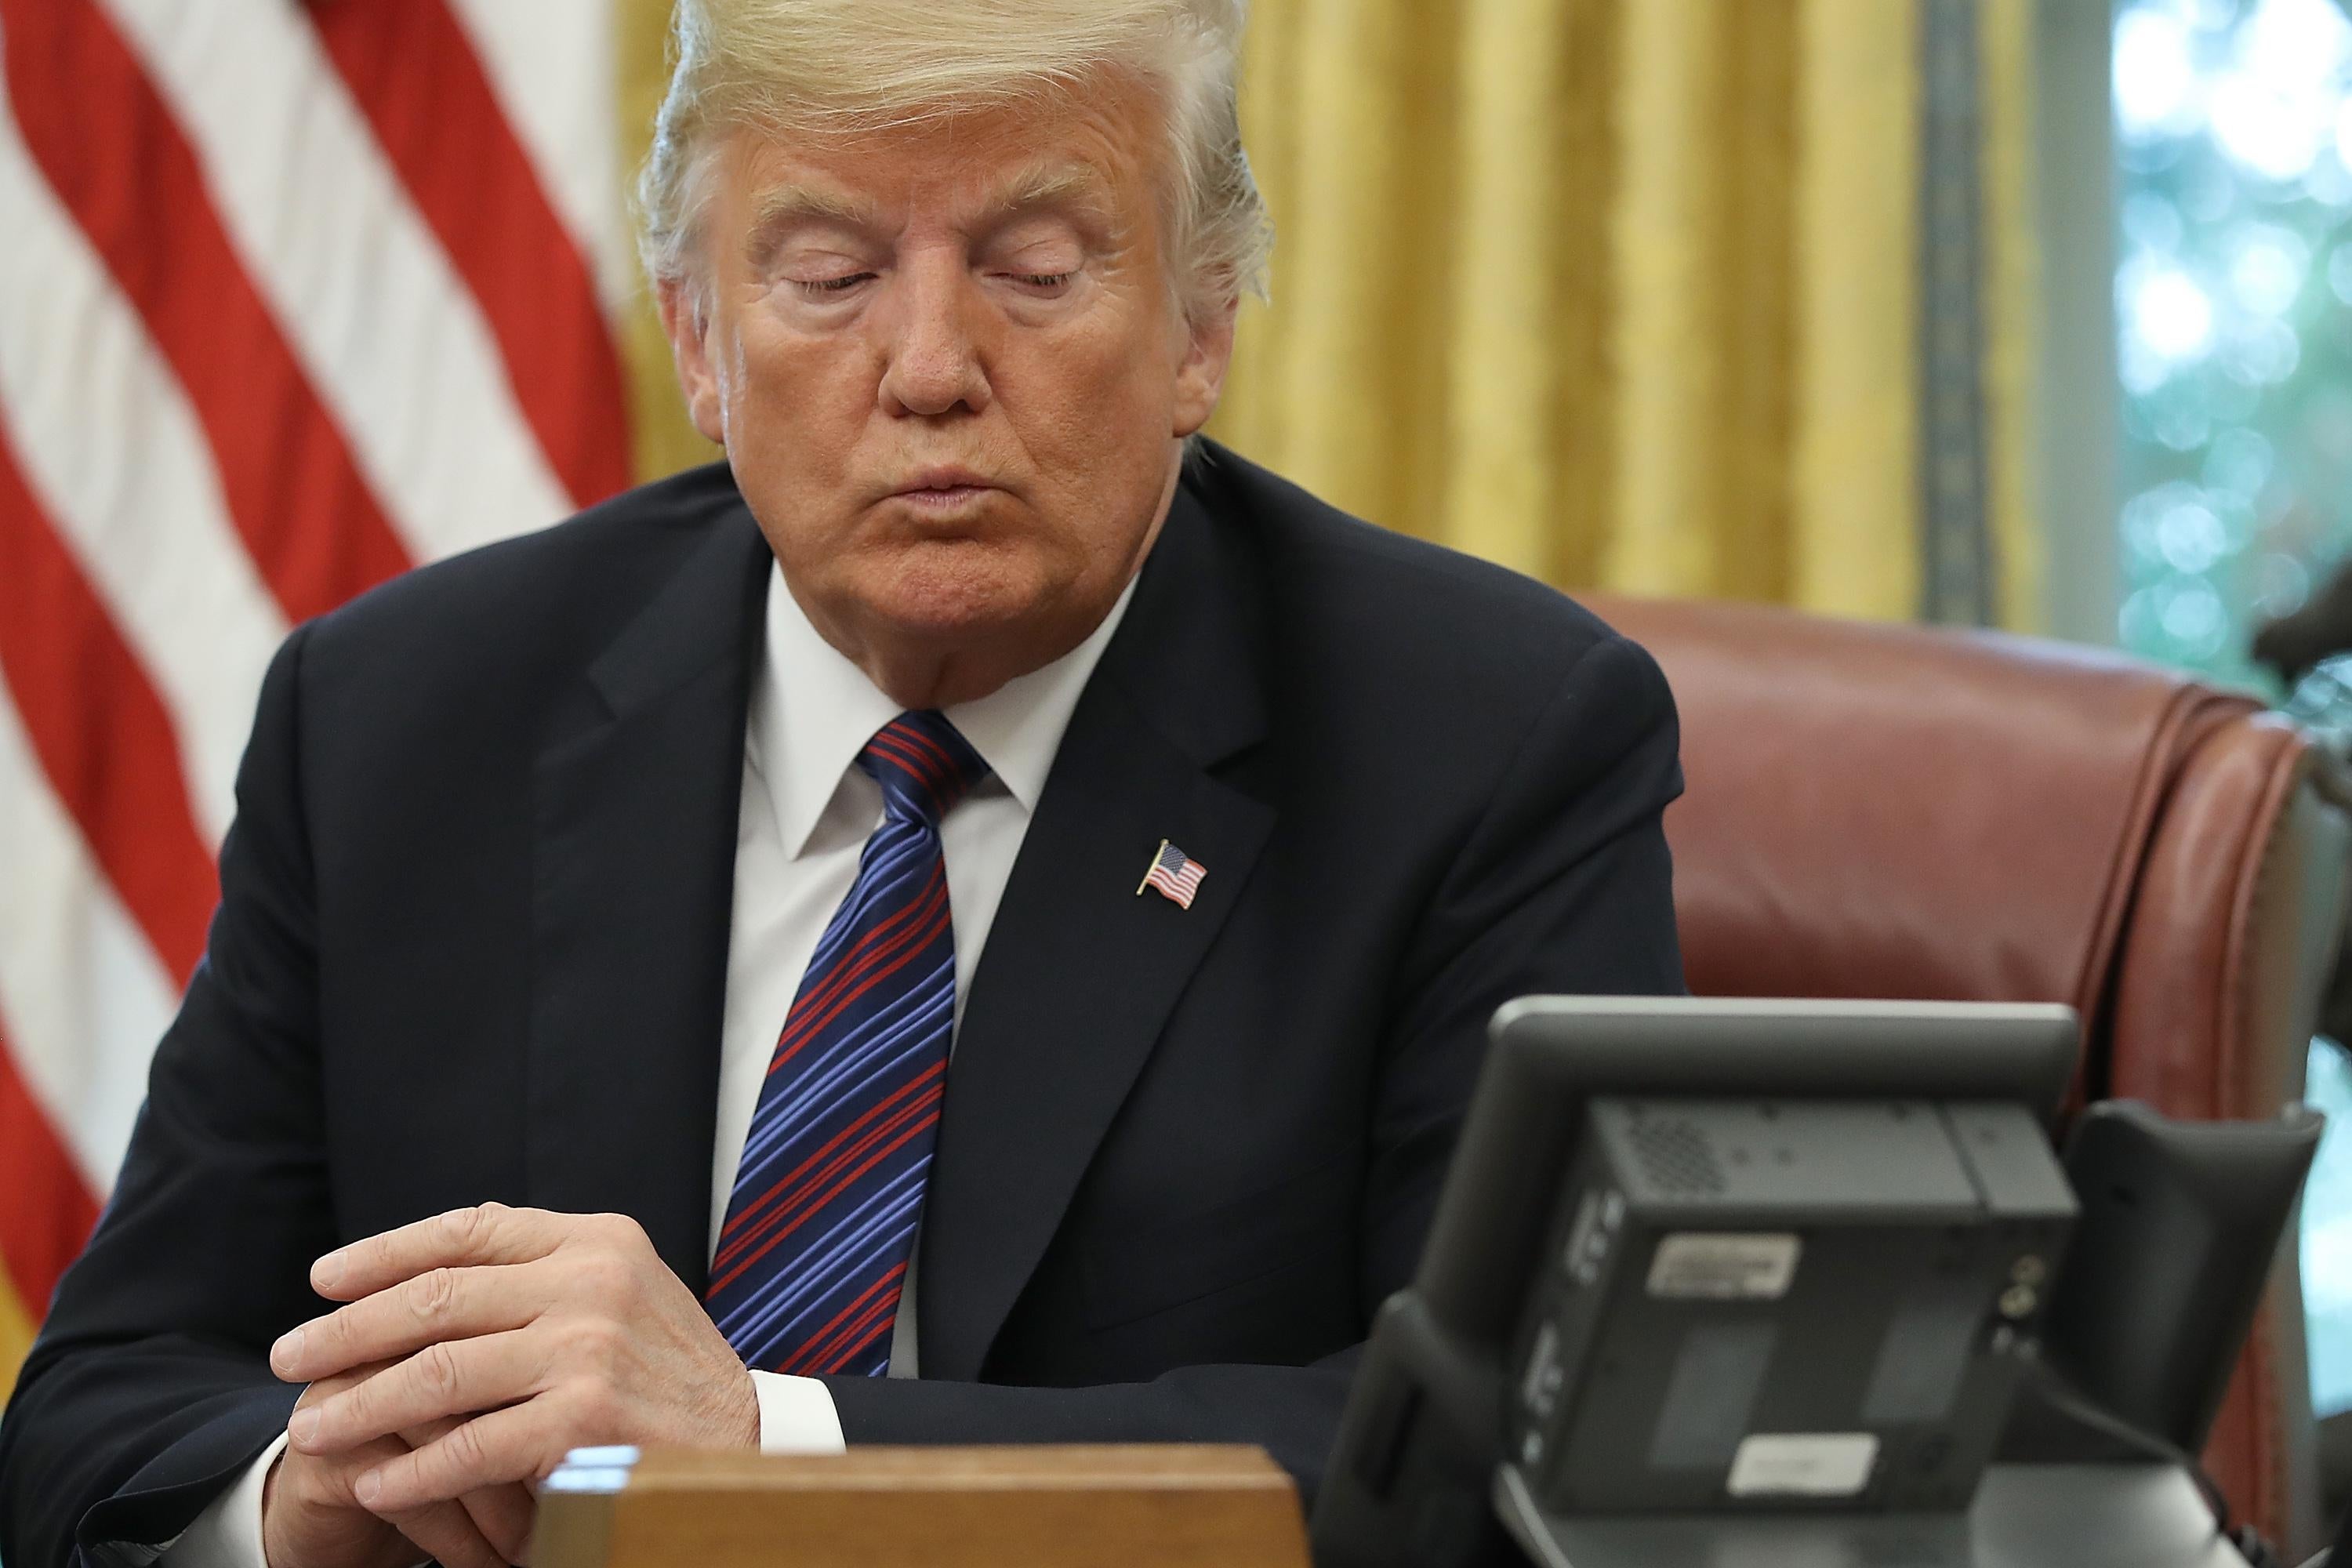 President Donald Trump speaks on the telephone via speakerphone in the Oval Office of the White House on August 27, 2018 in Washington, DC. 